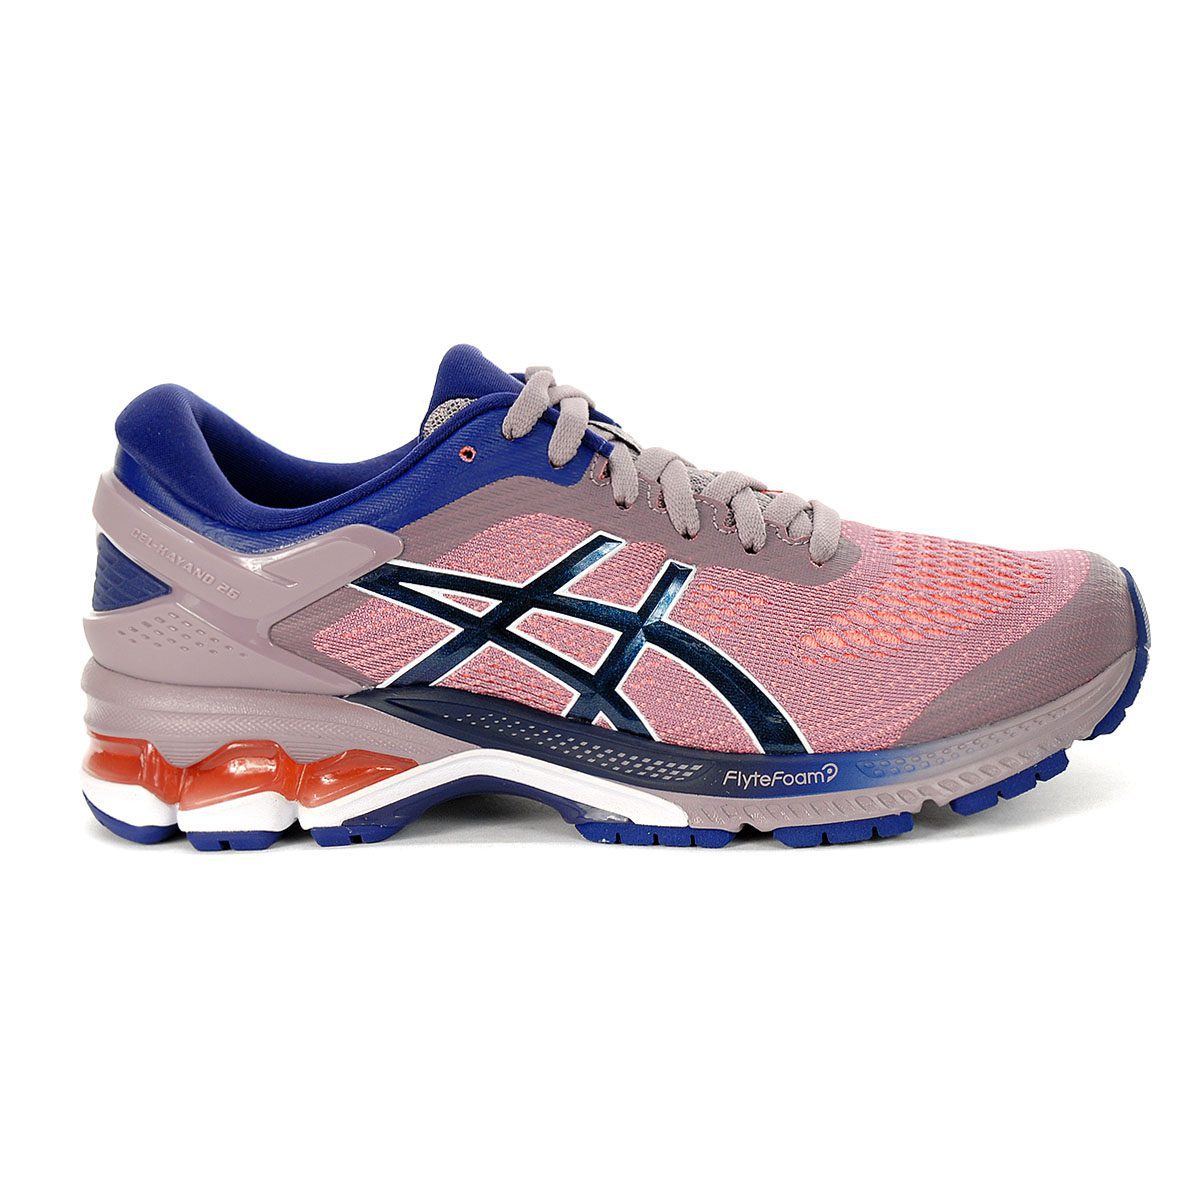 ASICS Women's Kayano 26 Violet Blush/Dive Blue Running Shoes 1012A457.500 NEW